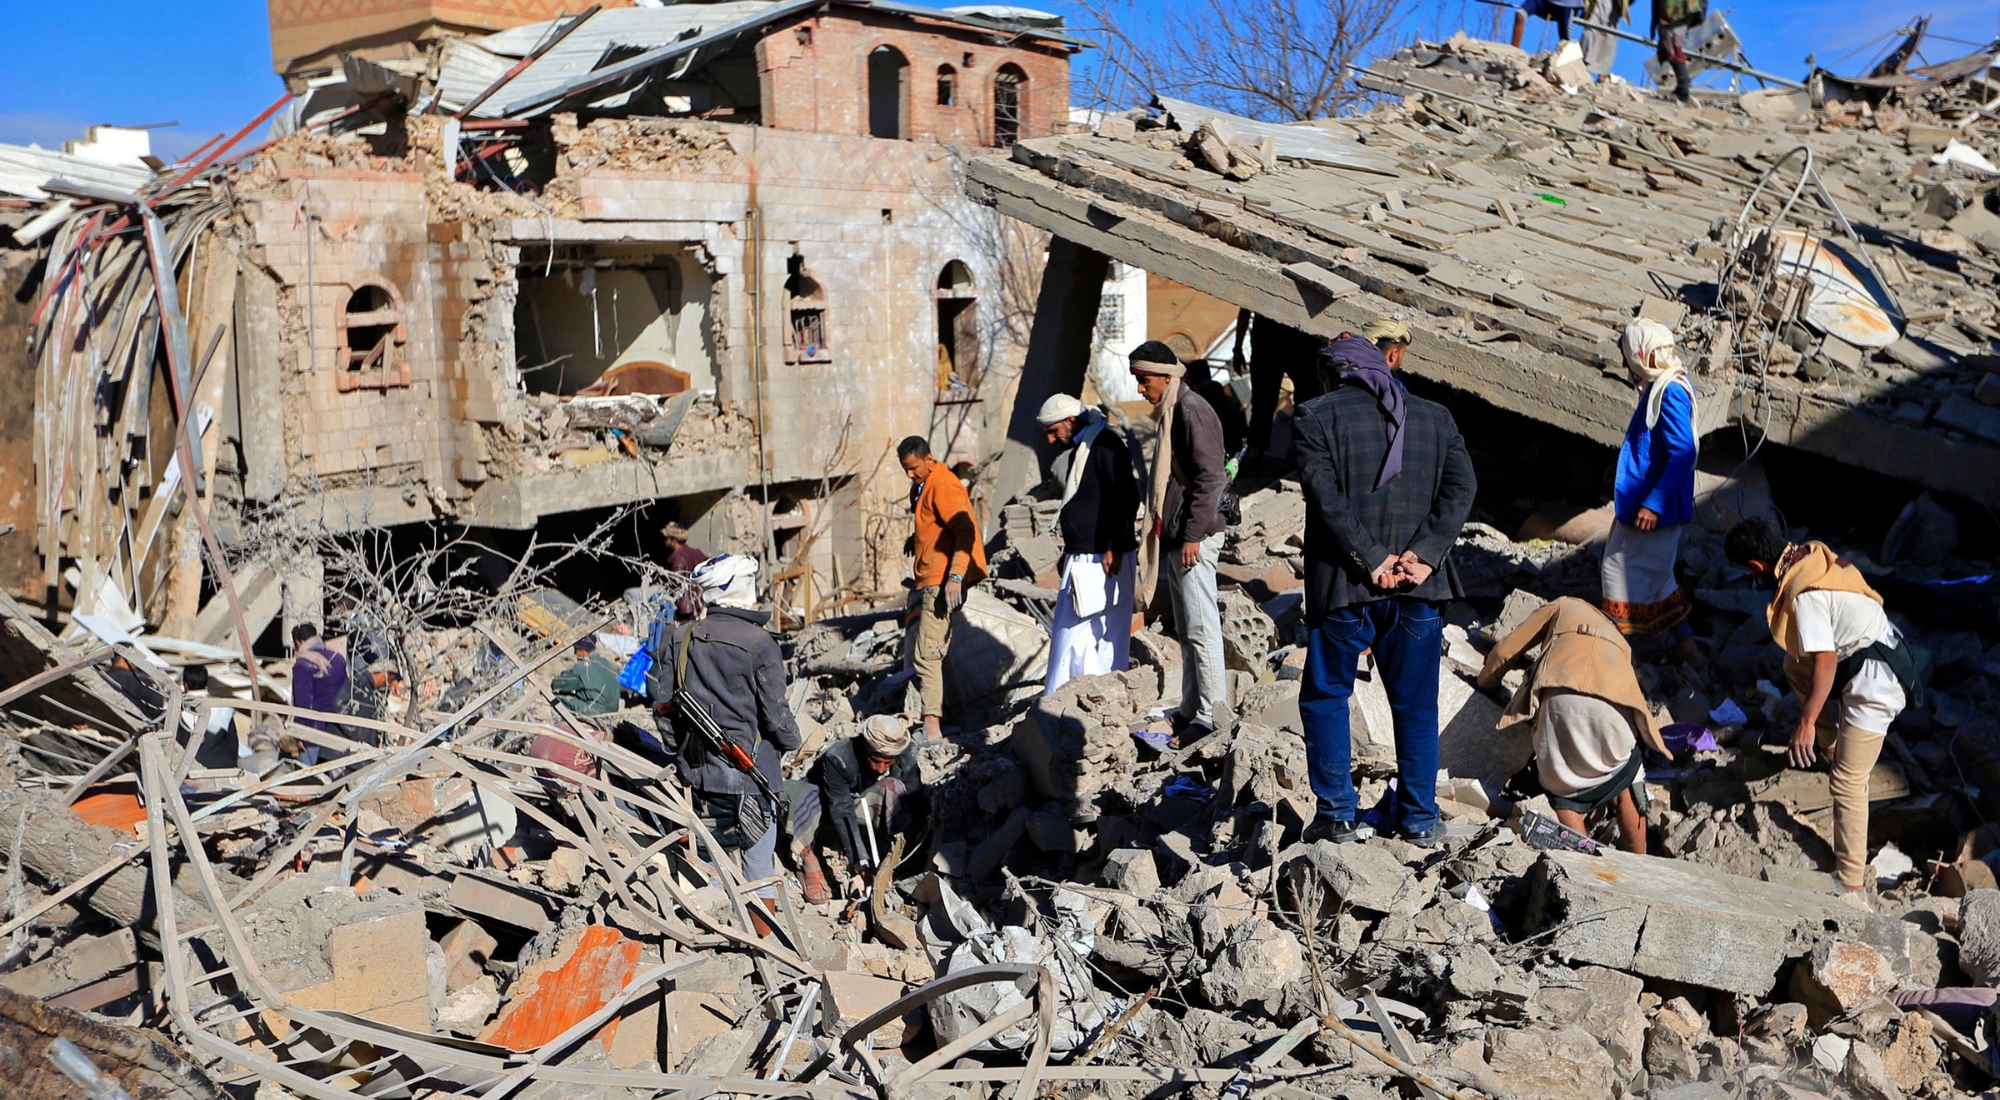 Yemenis inspect the damage following overnight air strikes by the Saudi-led coalition targeting the Huthi rebel-held capital Sanaa, on January 18, 2022. - The Saudi and UAE-led coalition coalition fighting Yemen's Huthi insurgents said it had launched air strikes targeting the rebel-held capital Sanaa after a deadly attack against coalition ally Abu Dhabi. (Photo by Mohammed Huwais/AFP via Getty Images)